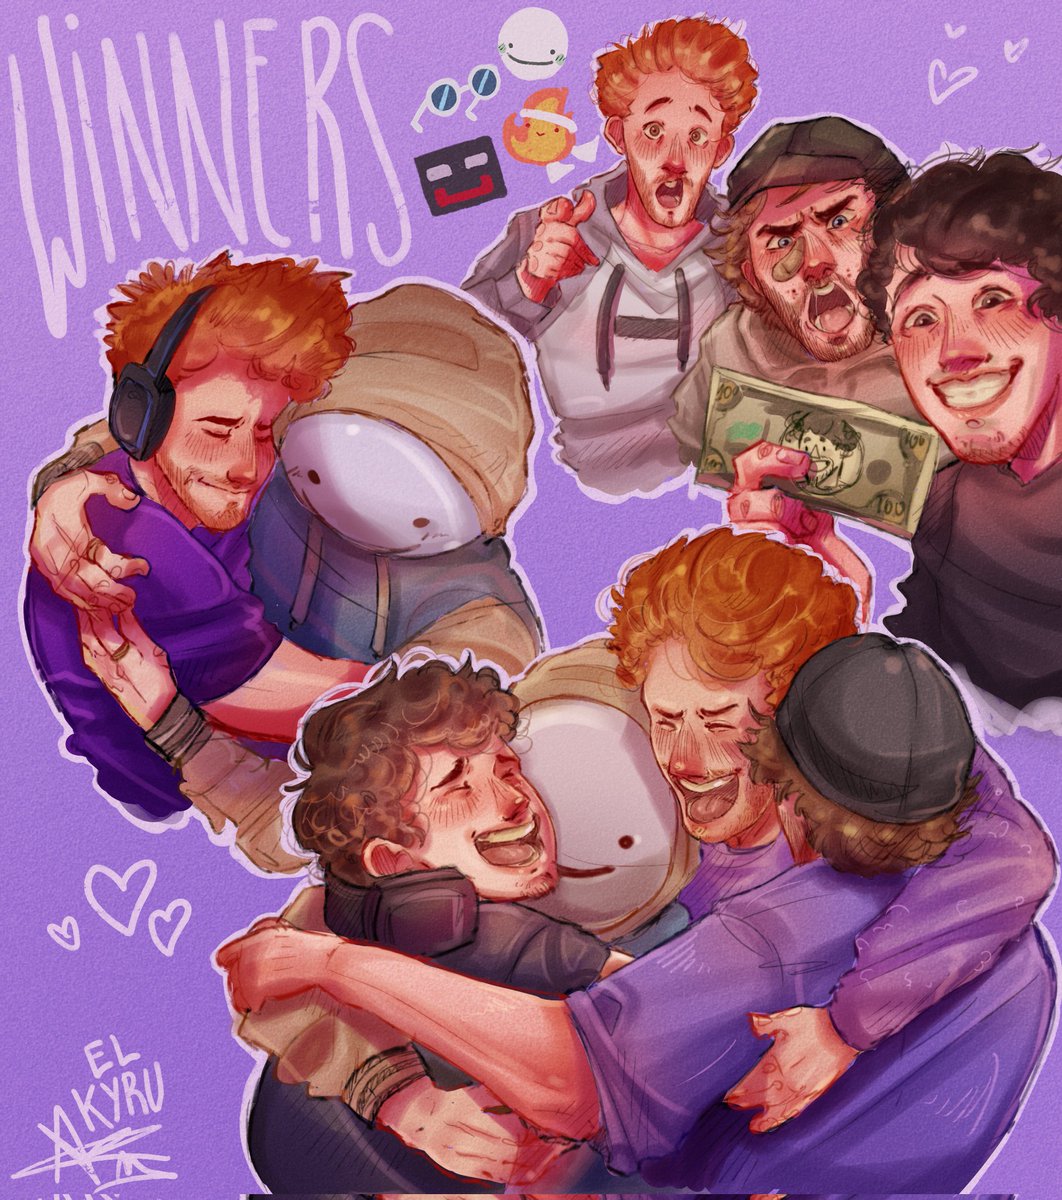 let's gooo my favorite boysss, they may not have won the twitch rivals but they did win an incredible friendship. love u guys, you did amazing <3

#dreamfanart #sapnapfanart #georgefanart #TwitchConParis